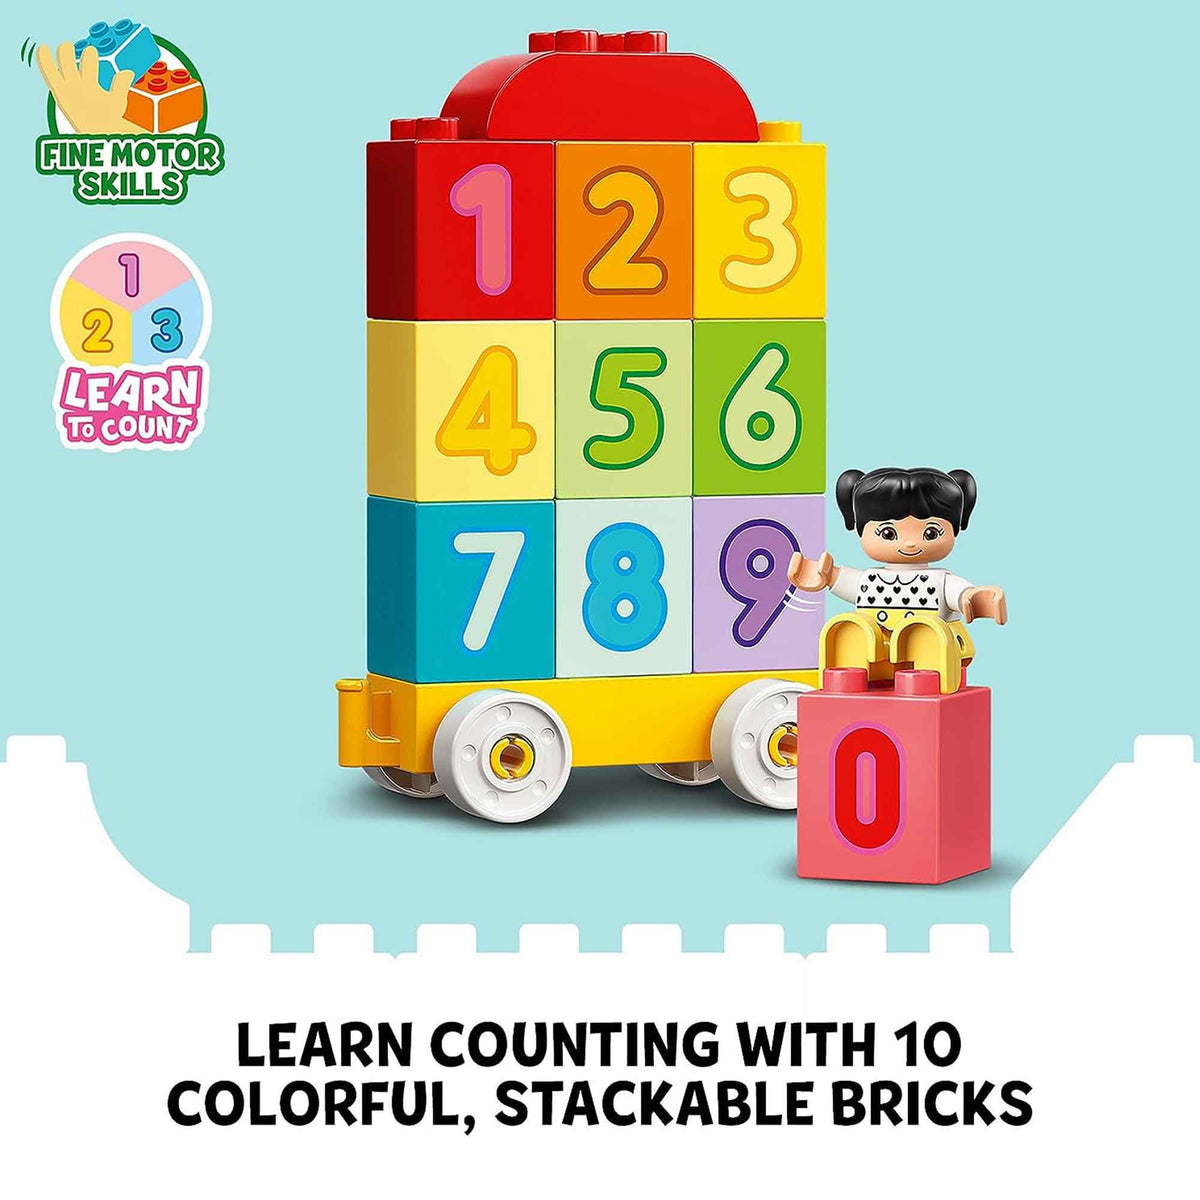 Duplo Number Train - Learn To Count